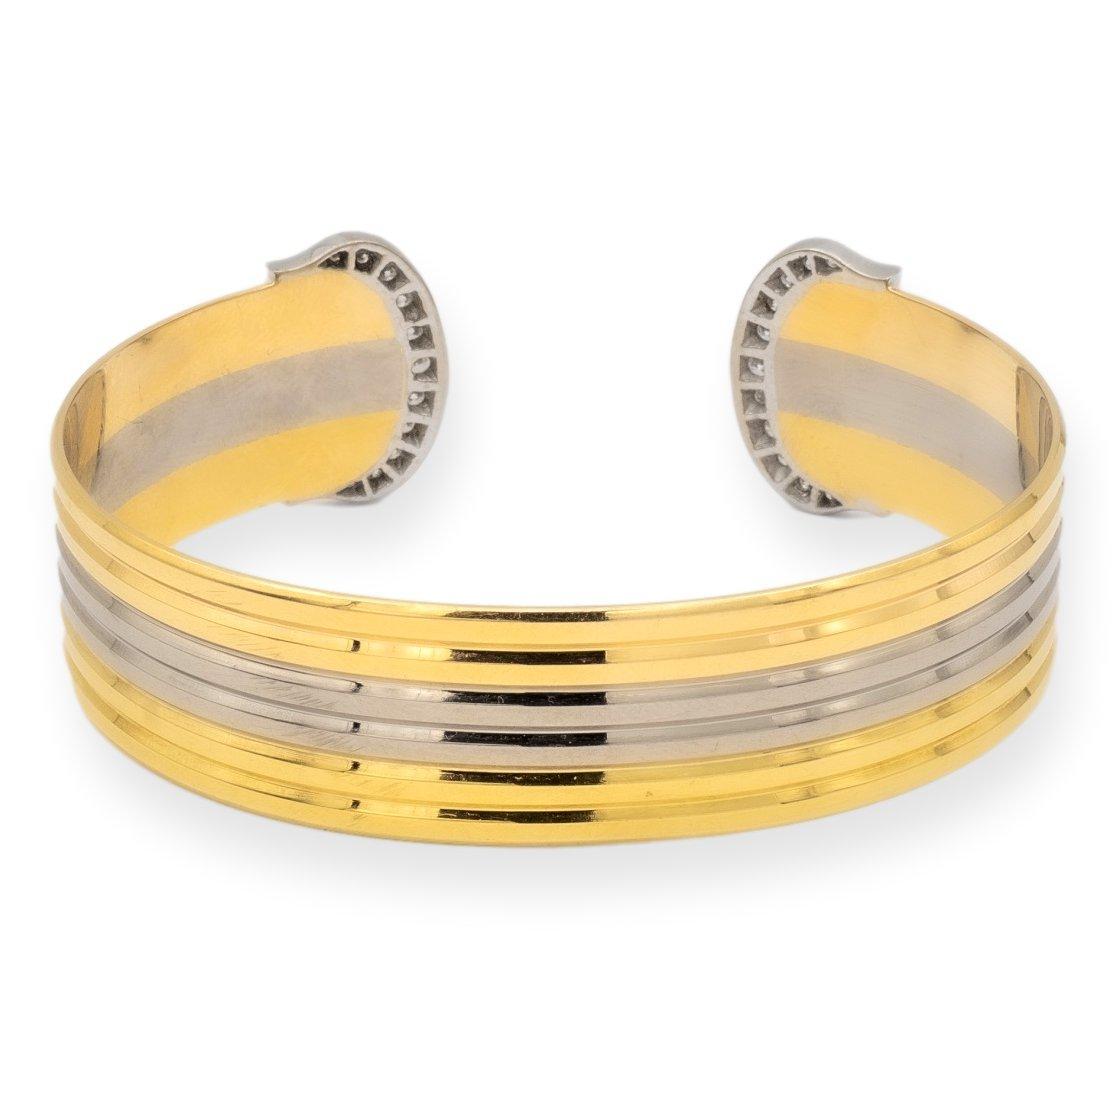 Vintage Cartier Trinity Open Cuff Bracelet from the esteemed C de Cartier collection. Crafted in the 1980s, finely crafted in 18K yellow, white, and rose gold, showcasing the iconic Double C ends that signify Cartier's enduring legacy. Embellished